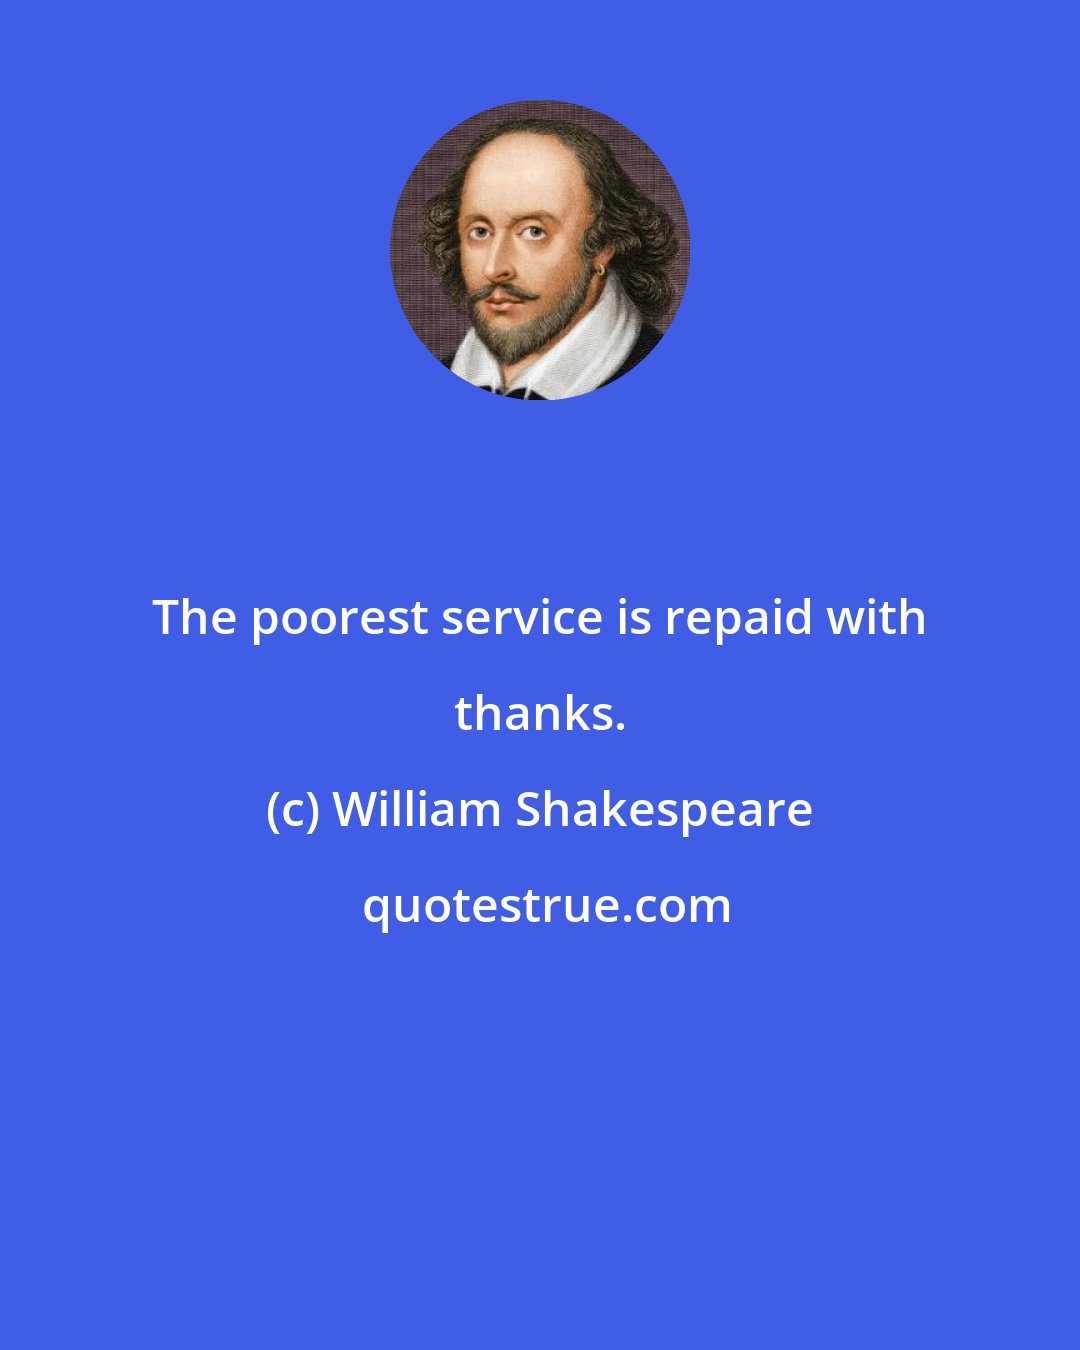 William Shakespeare: The poorest service is repaid with thanks.